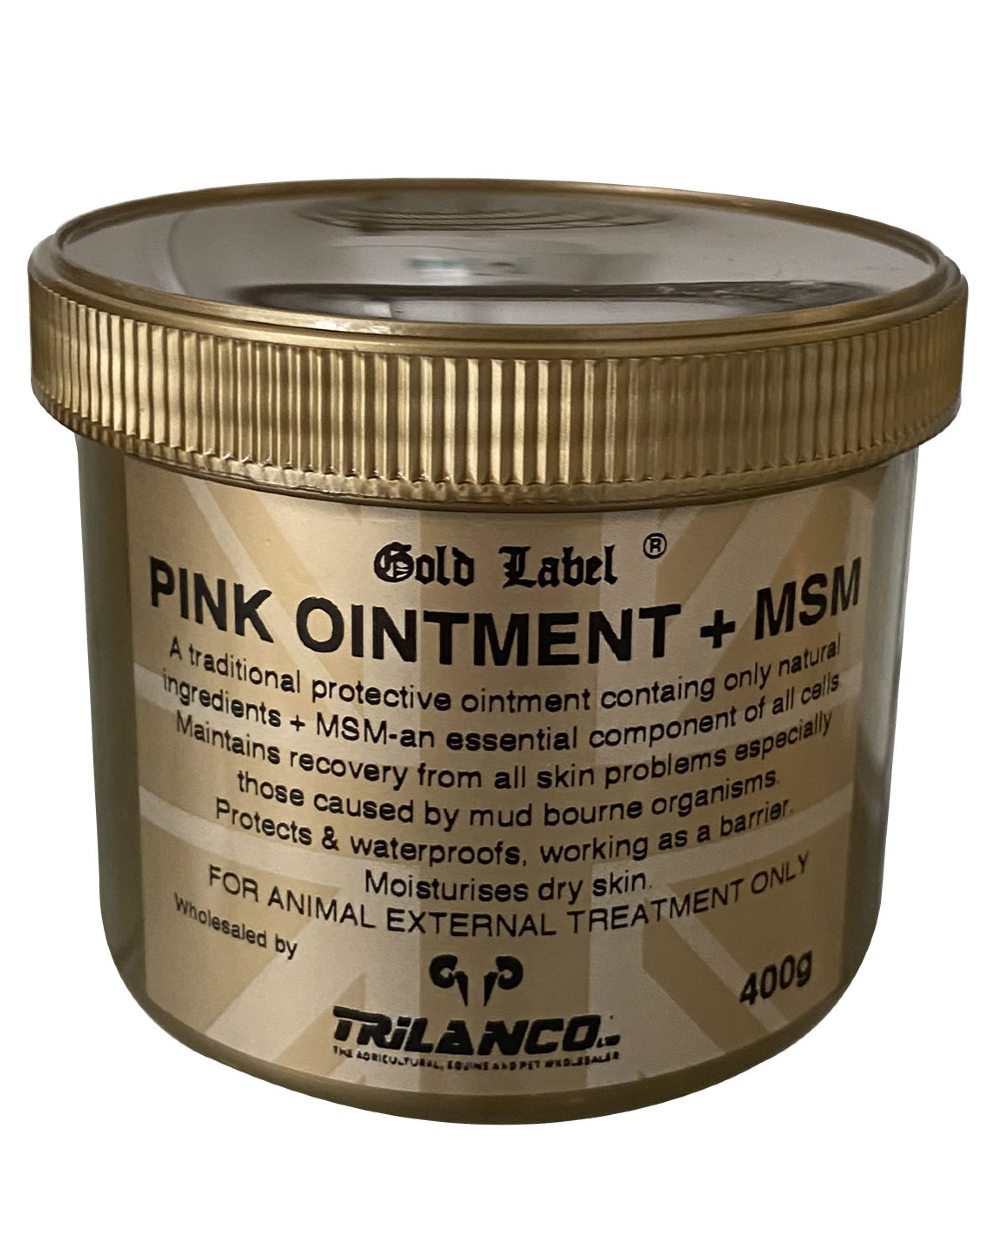 Gold Label Pink Ointment + Msm On A White Background